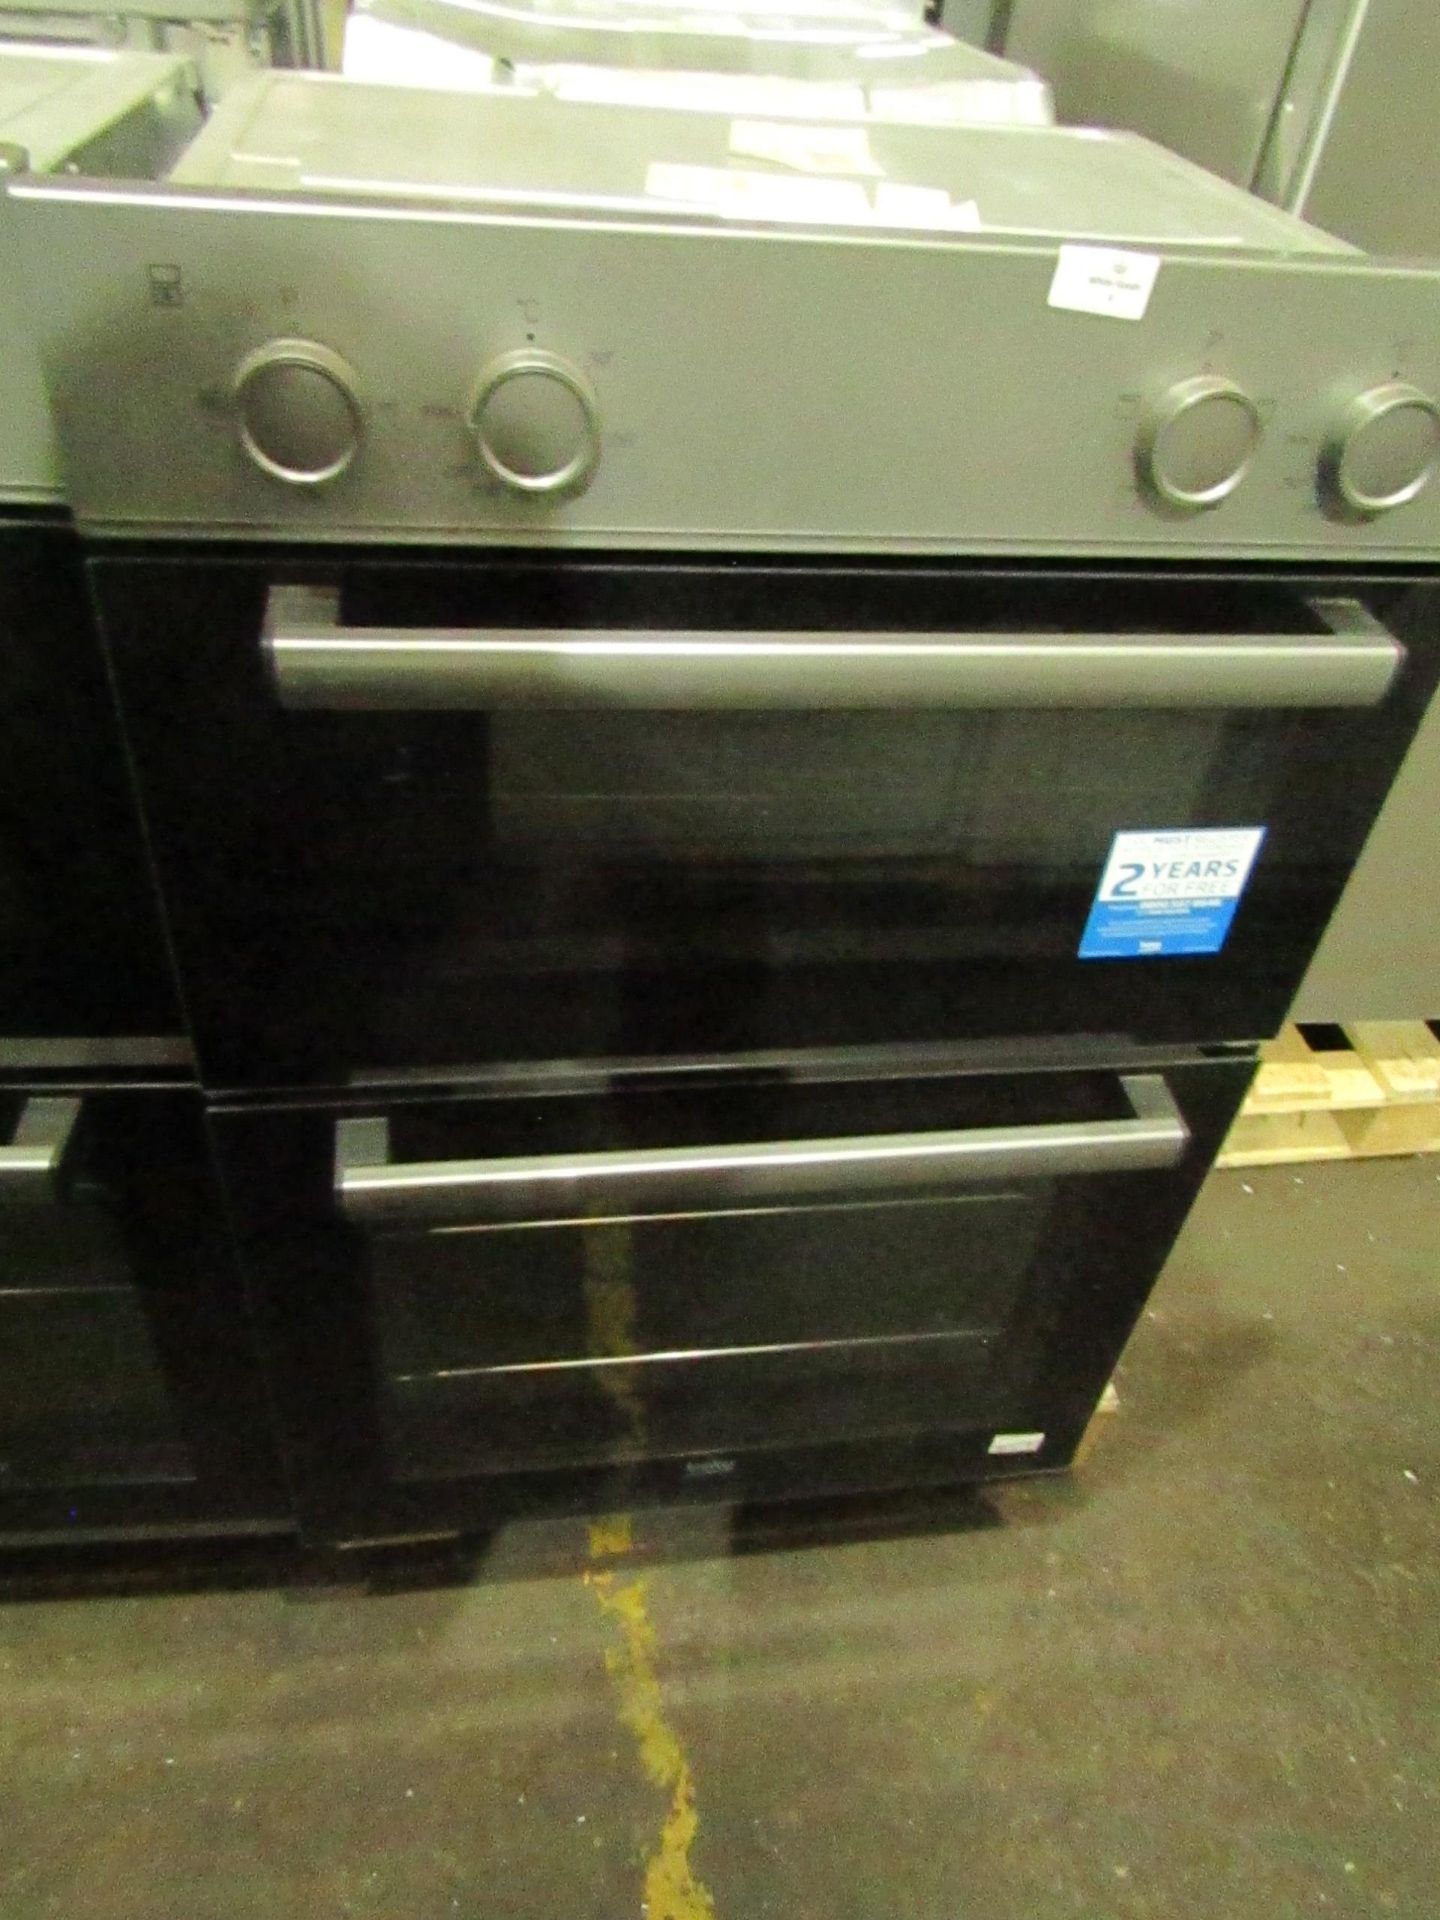 BEKO RecycledNet Electric Double Oven Silver BBXDF21000S RRP “?279.00 - The items in this lot are